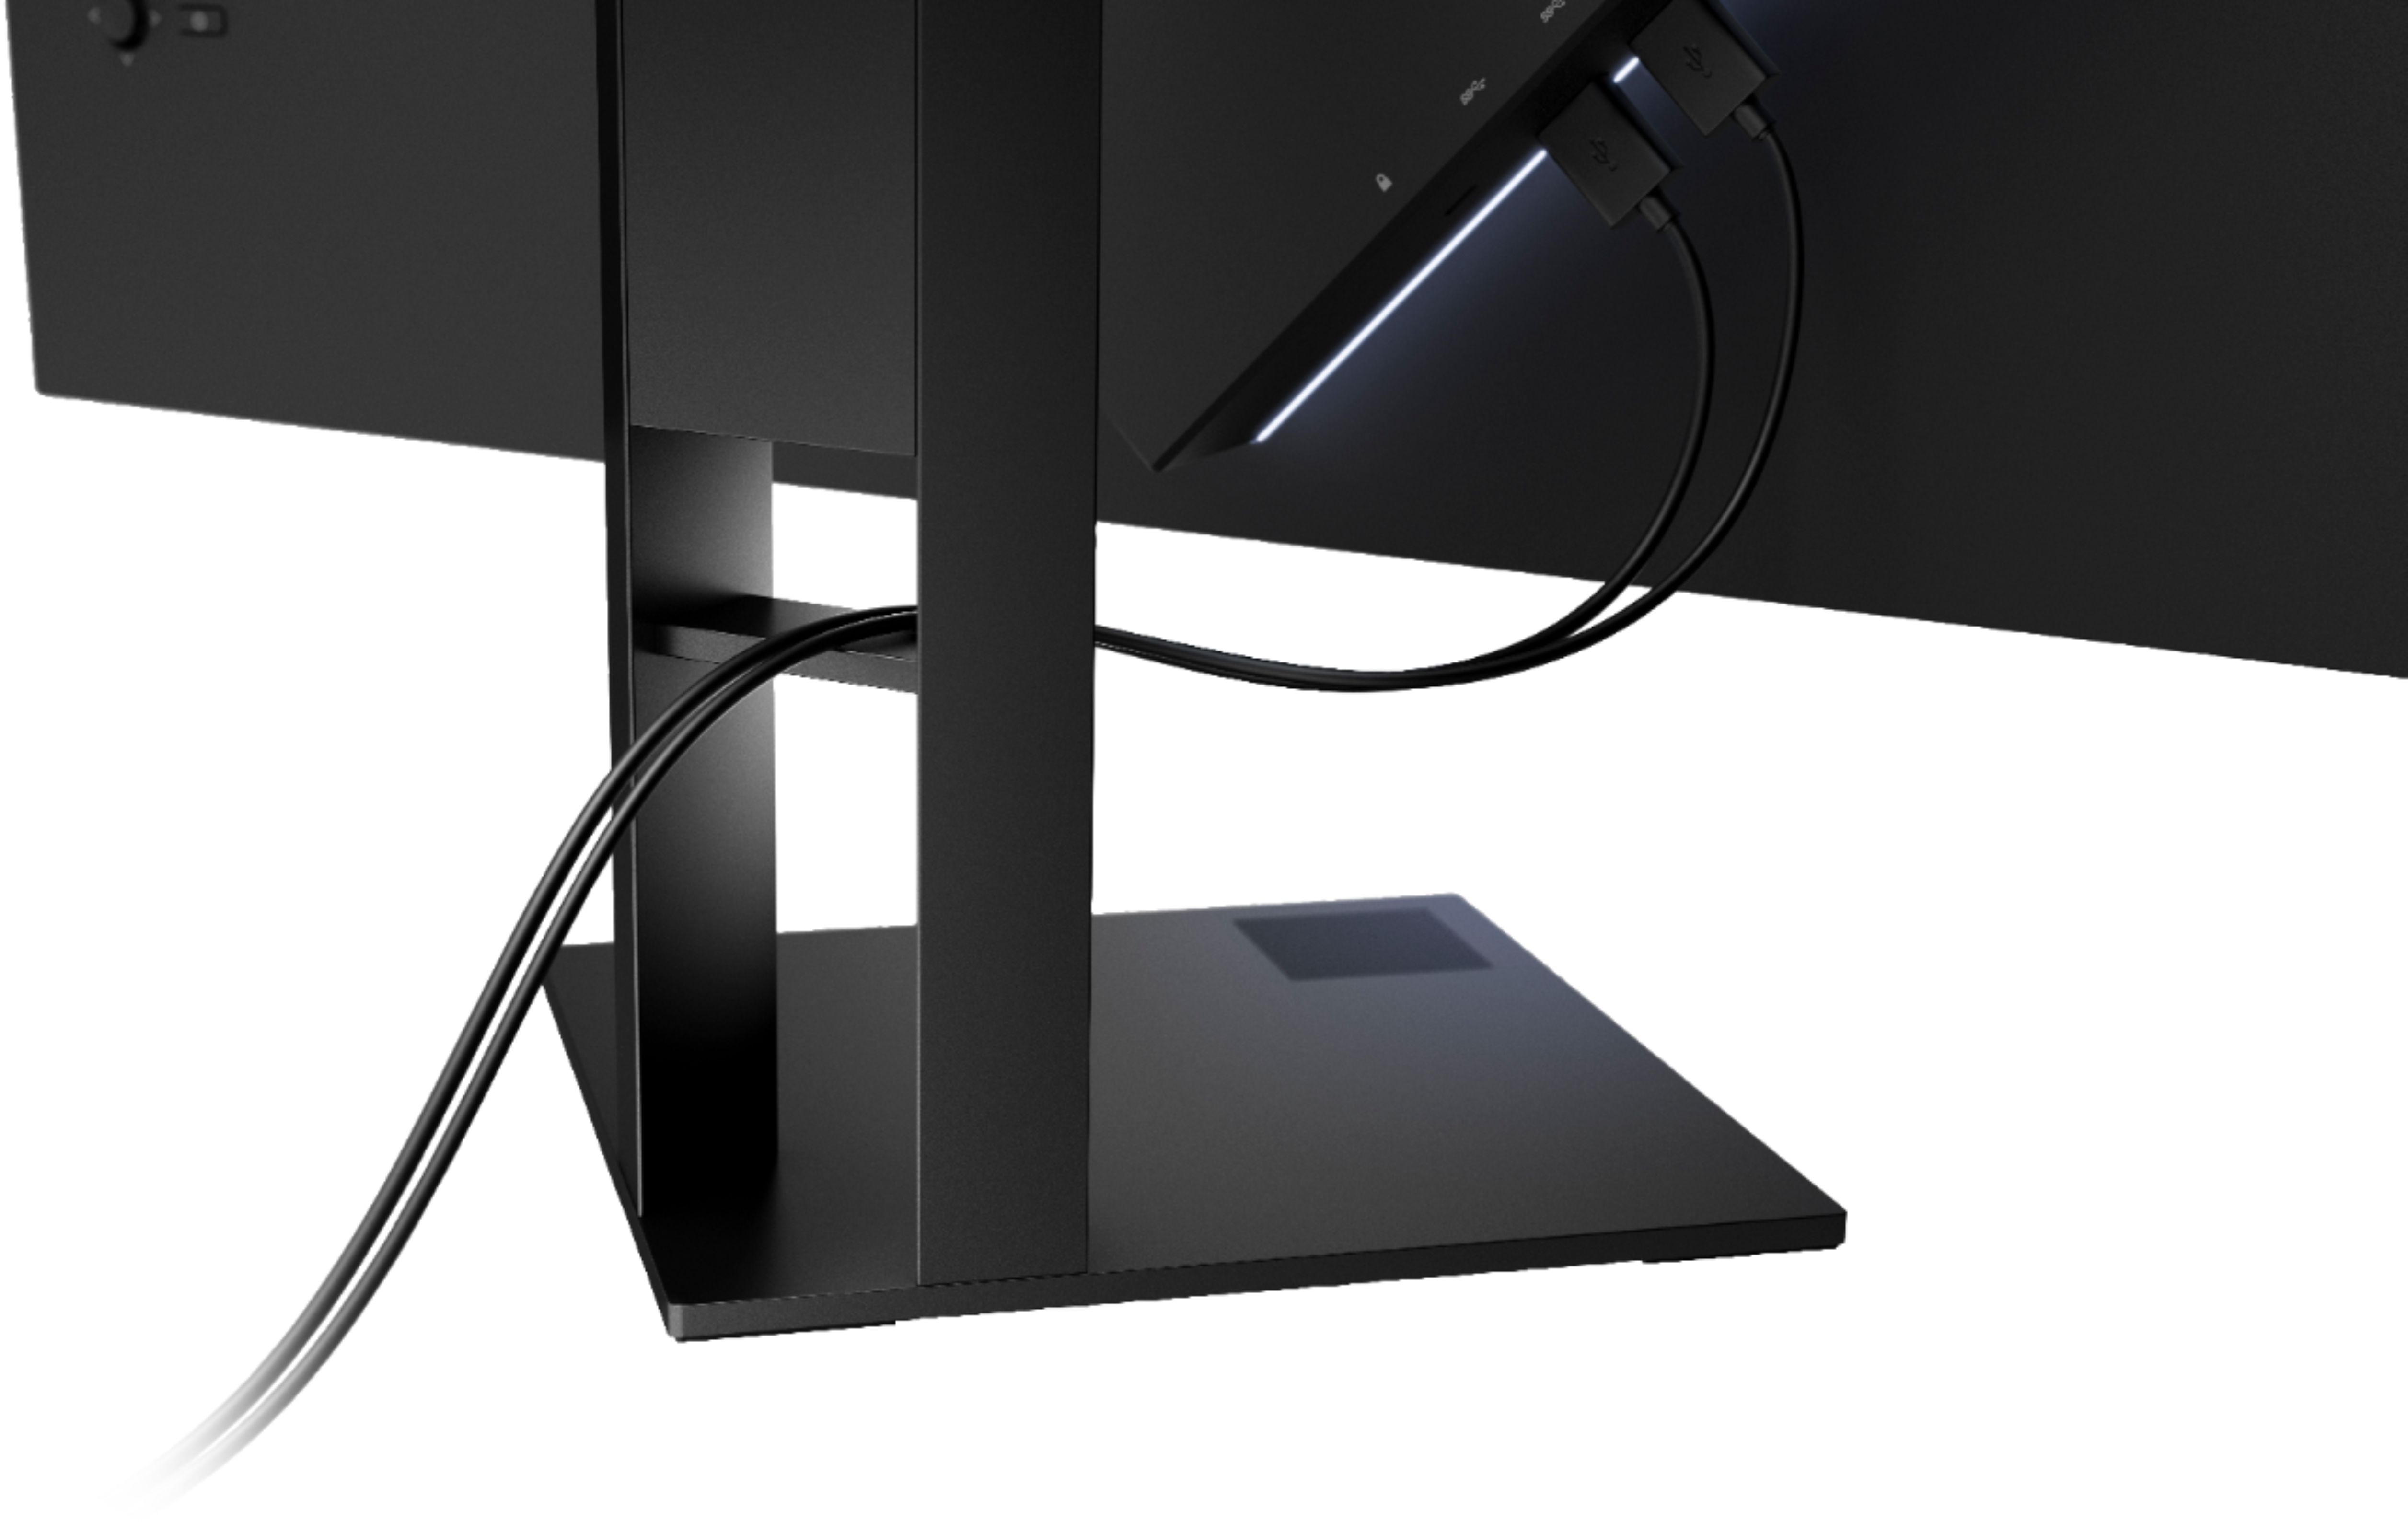 HP Omen 27 Stand/Base